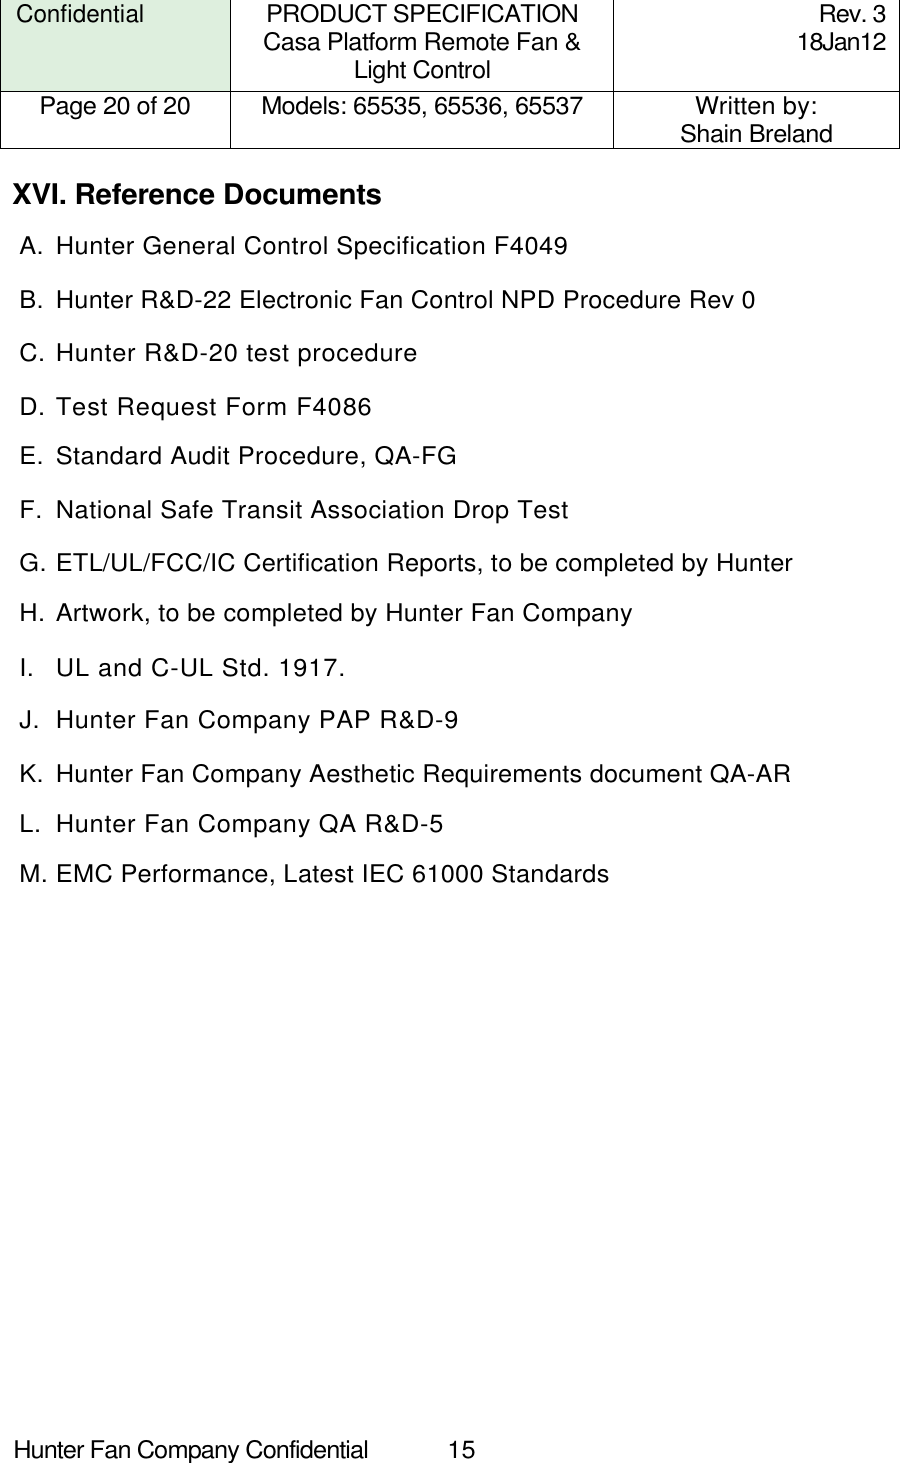  Hunter Fan Company Confidential  15  Confidential PRODUCT SPECIFICATION Casa Platform Remote Fan &amp; Light Control Rev. 3 18Jan12 Page 20 of 20  Models: 65535, 65536, 65537  Written by: Shain Breland  XVI. Reference Documents A.  Hunter General Control Specification F4049 B.  Hunter R&amp;D-22 Electronic Fan Control NPD Procedure Rev 0 C. Hunter R&amp;D-20 test procedure D. Test Request Form F4086 E.  Standard Audit Procedure, QA-FG F.  National Safe Transit Association Drop Test G. ETL/UL/FCC/IC Certification Reports, to be completed by Hunter H. Artwork, to be completed by Hunter Fan Company I.  UL and C-UL Std. 1917. J.  Hunter Fan Company PAP R&amp;D-9 K.  Hunter Fan Company Aesthetic Requirements document QA-AR L.  Hunter Fan Company QA R&amp;D-5 M. EMC Performance, Latest IEC 61000 Standards 